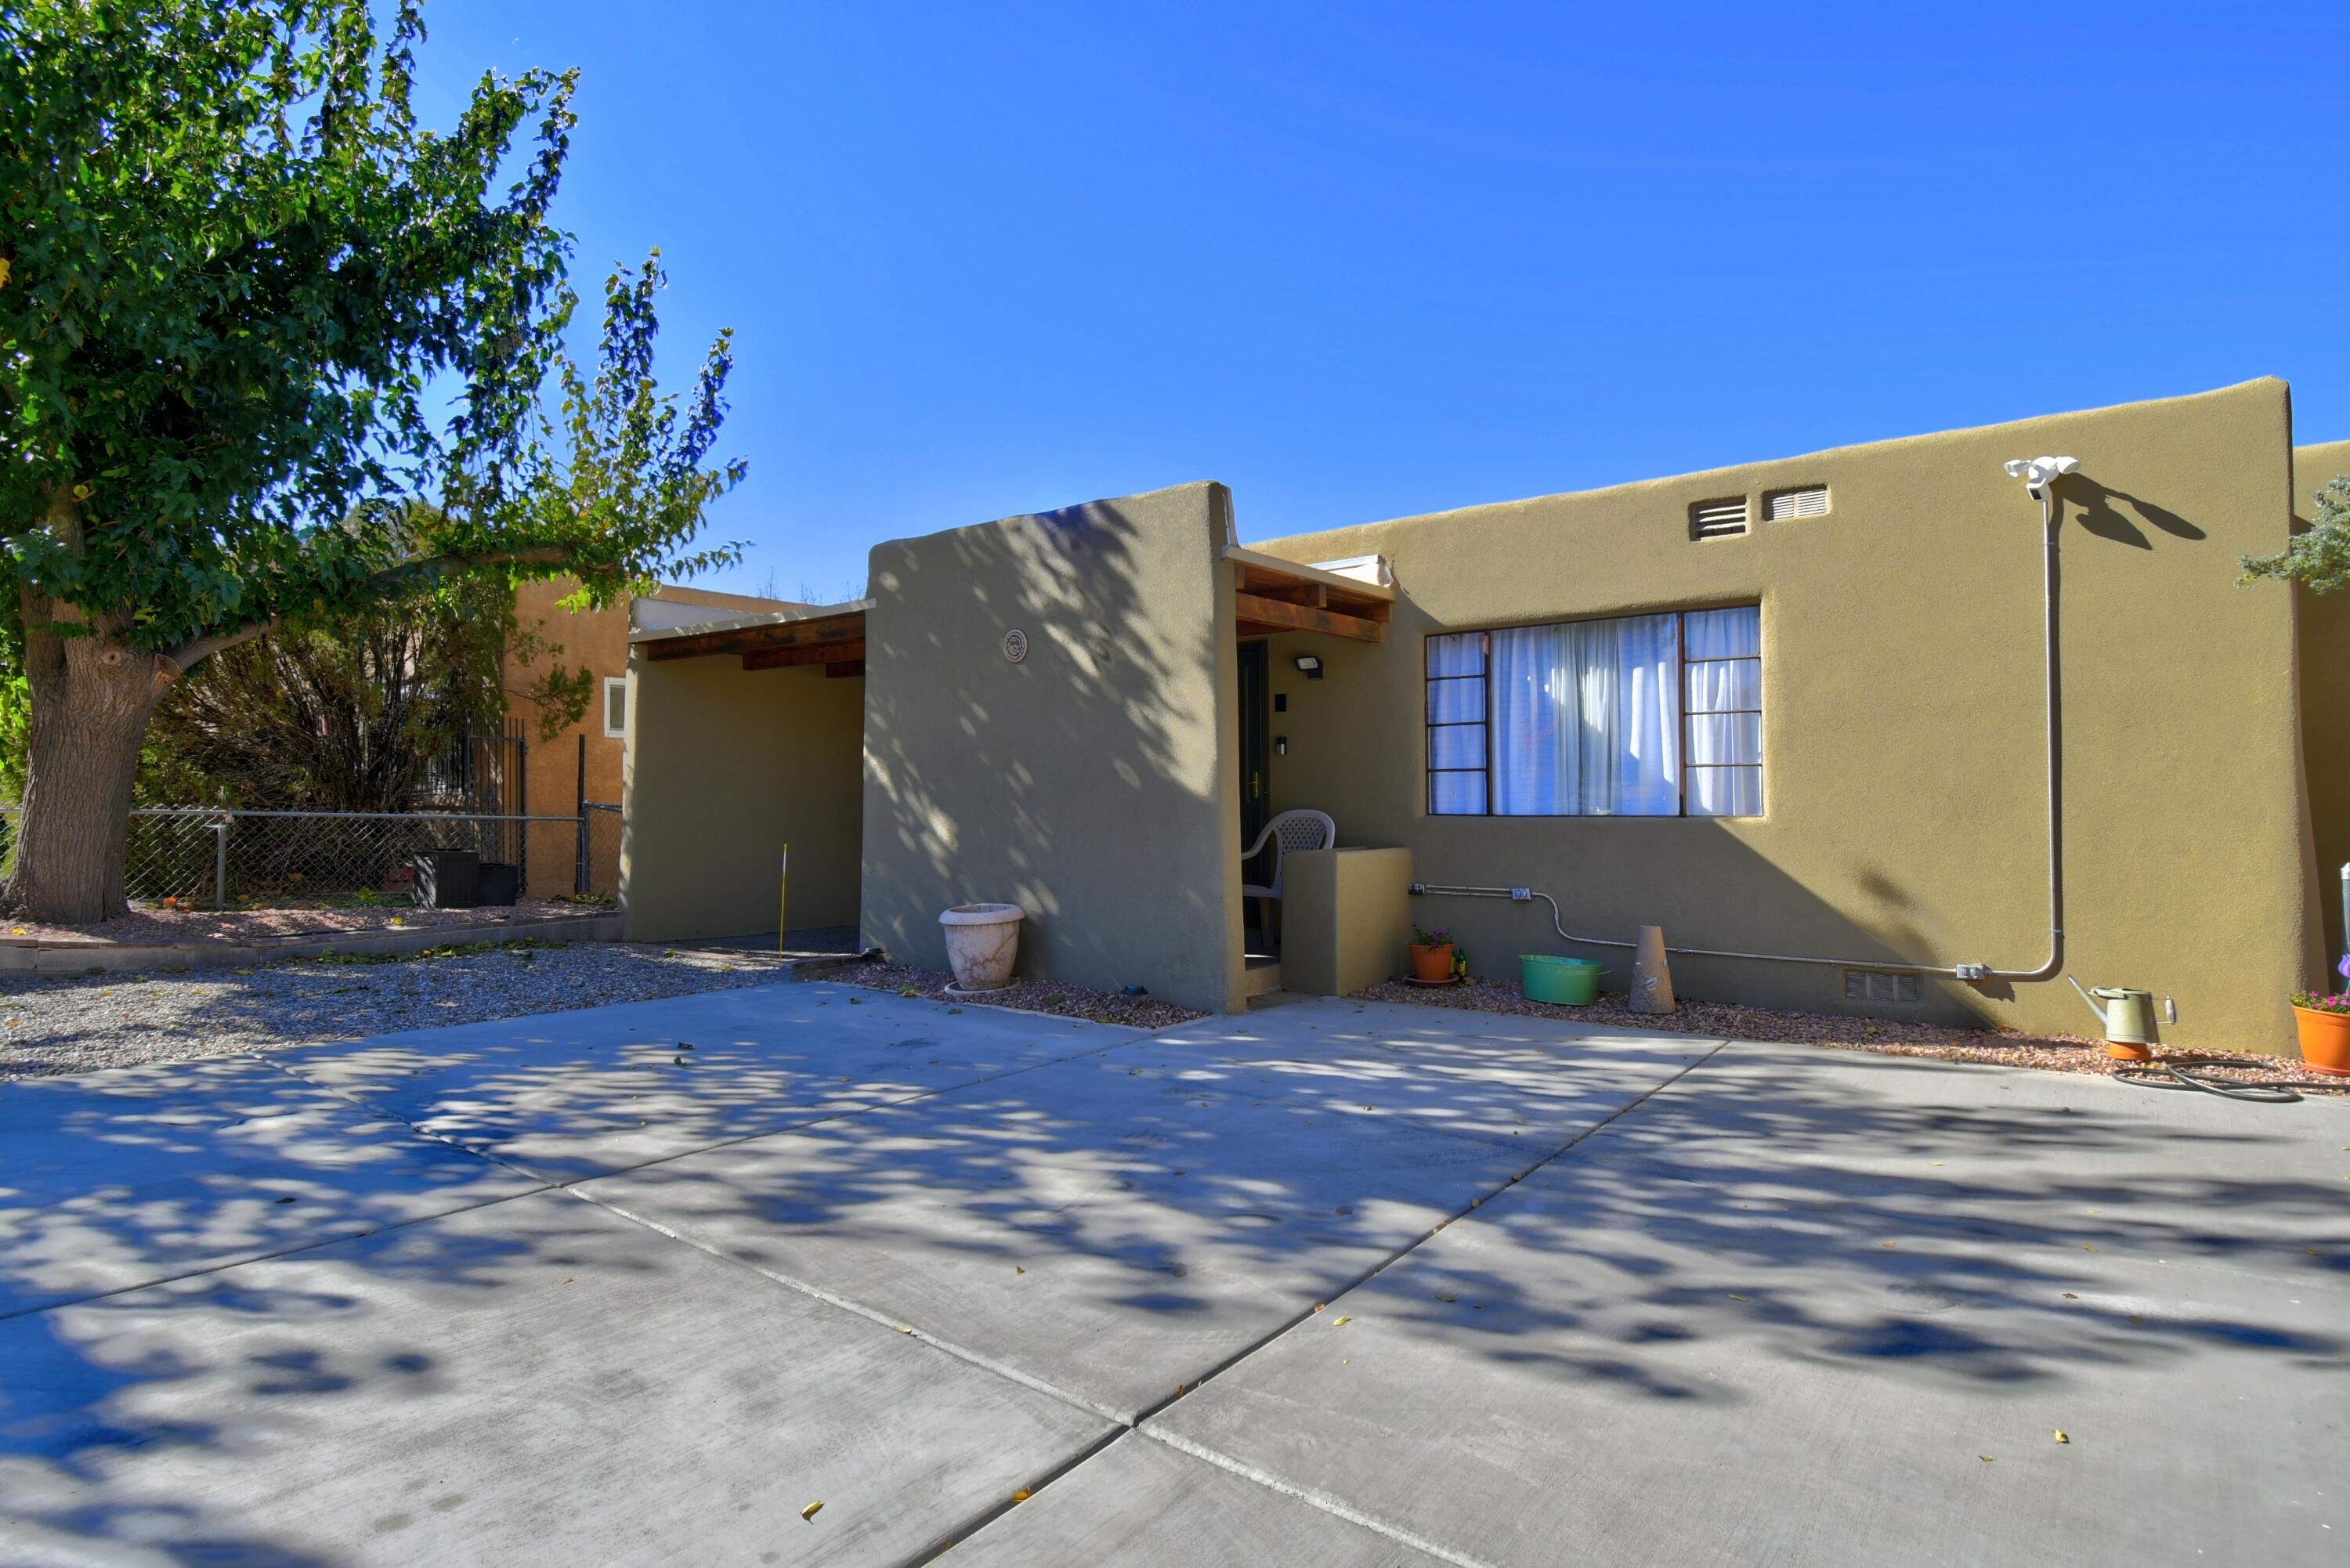 This beauty is centrally located in the area on UNM/Nob Hill. Updates include New Roof, New Synthetic/fiber Stucco, New Flooring, Upgraded Electrical Panel, New Central Duct work, New Furnace and Cooling System, New Concrete Driveway, remodeled bathrooms w/new toilets, Remodeled kitchen, Reinforced foundation block pillars in crawl space, New Paint throughout. Beautiful Patio for cooking and grilling. BACKYARD ACCESS!  RV parking w/sewage lines for RV or future unit(s). Centrally located to UNM, stadiums, parks, libraries, restaurants, shopping in downtown ABQ! -Schedule your showing today!